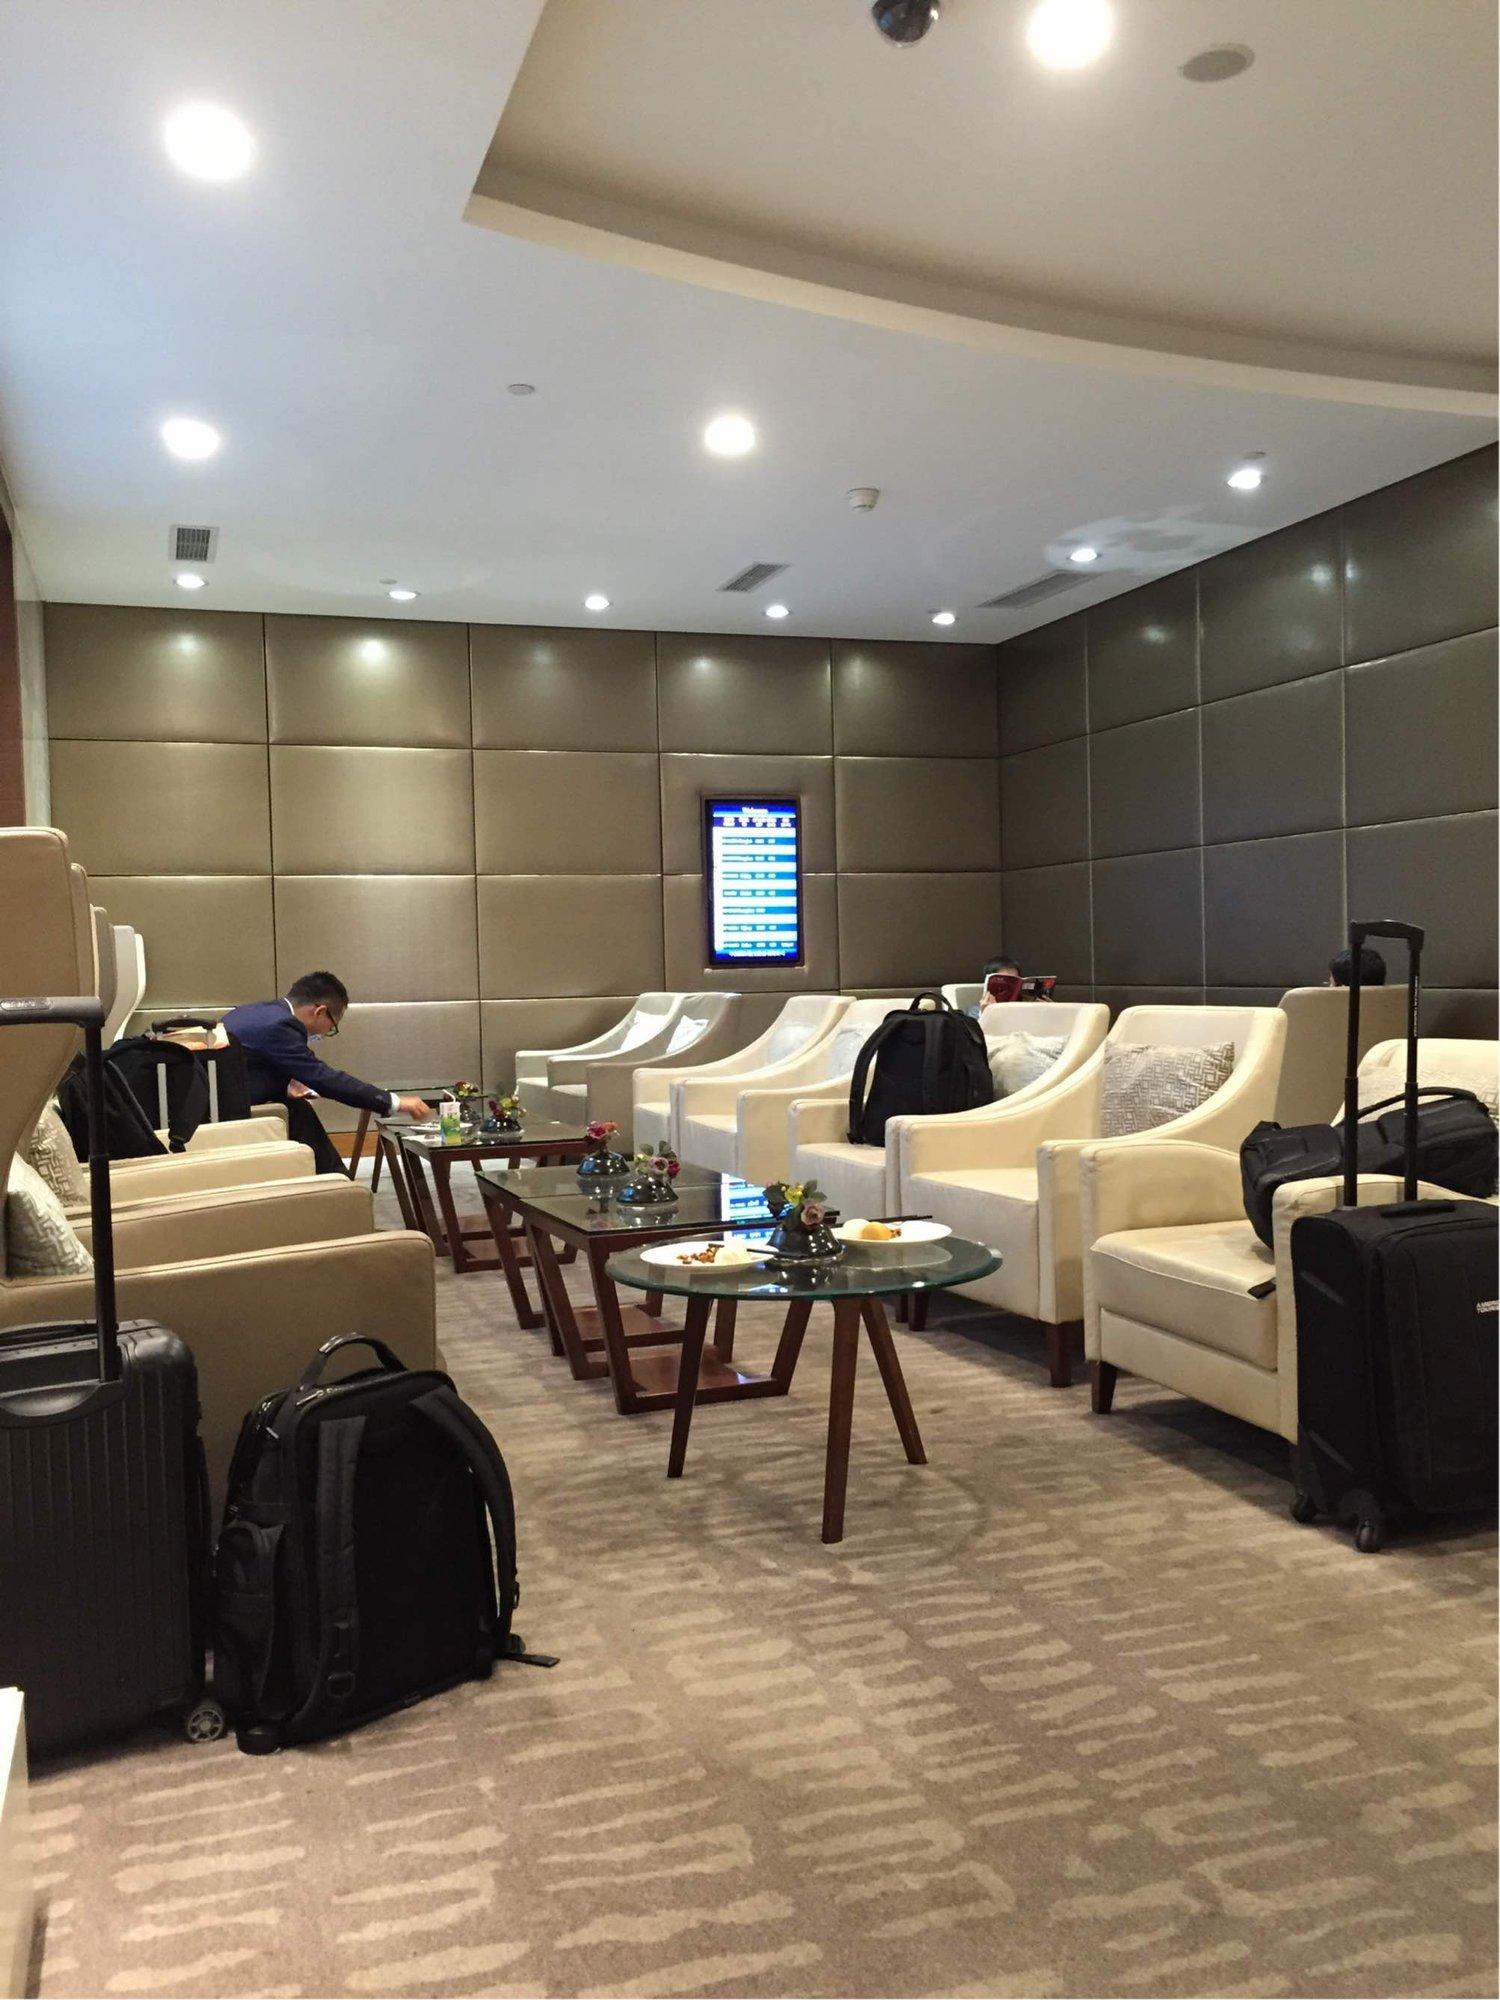 Air China First & Business Class Lounge image 2 of 2